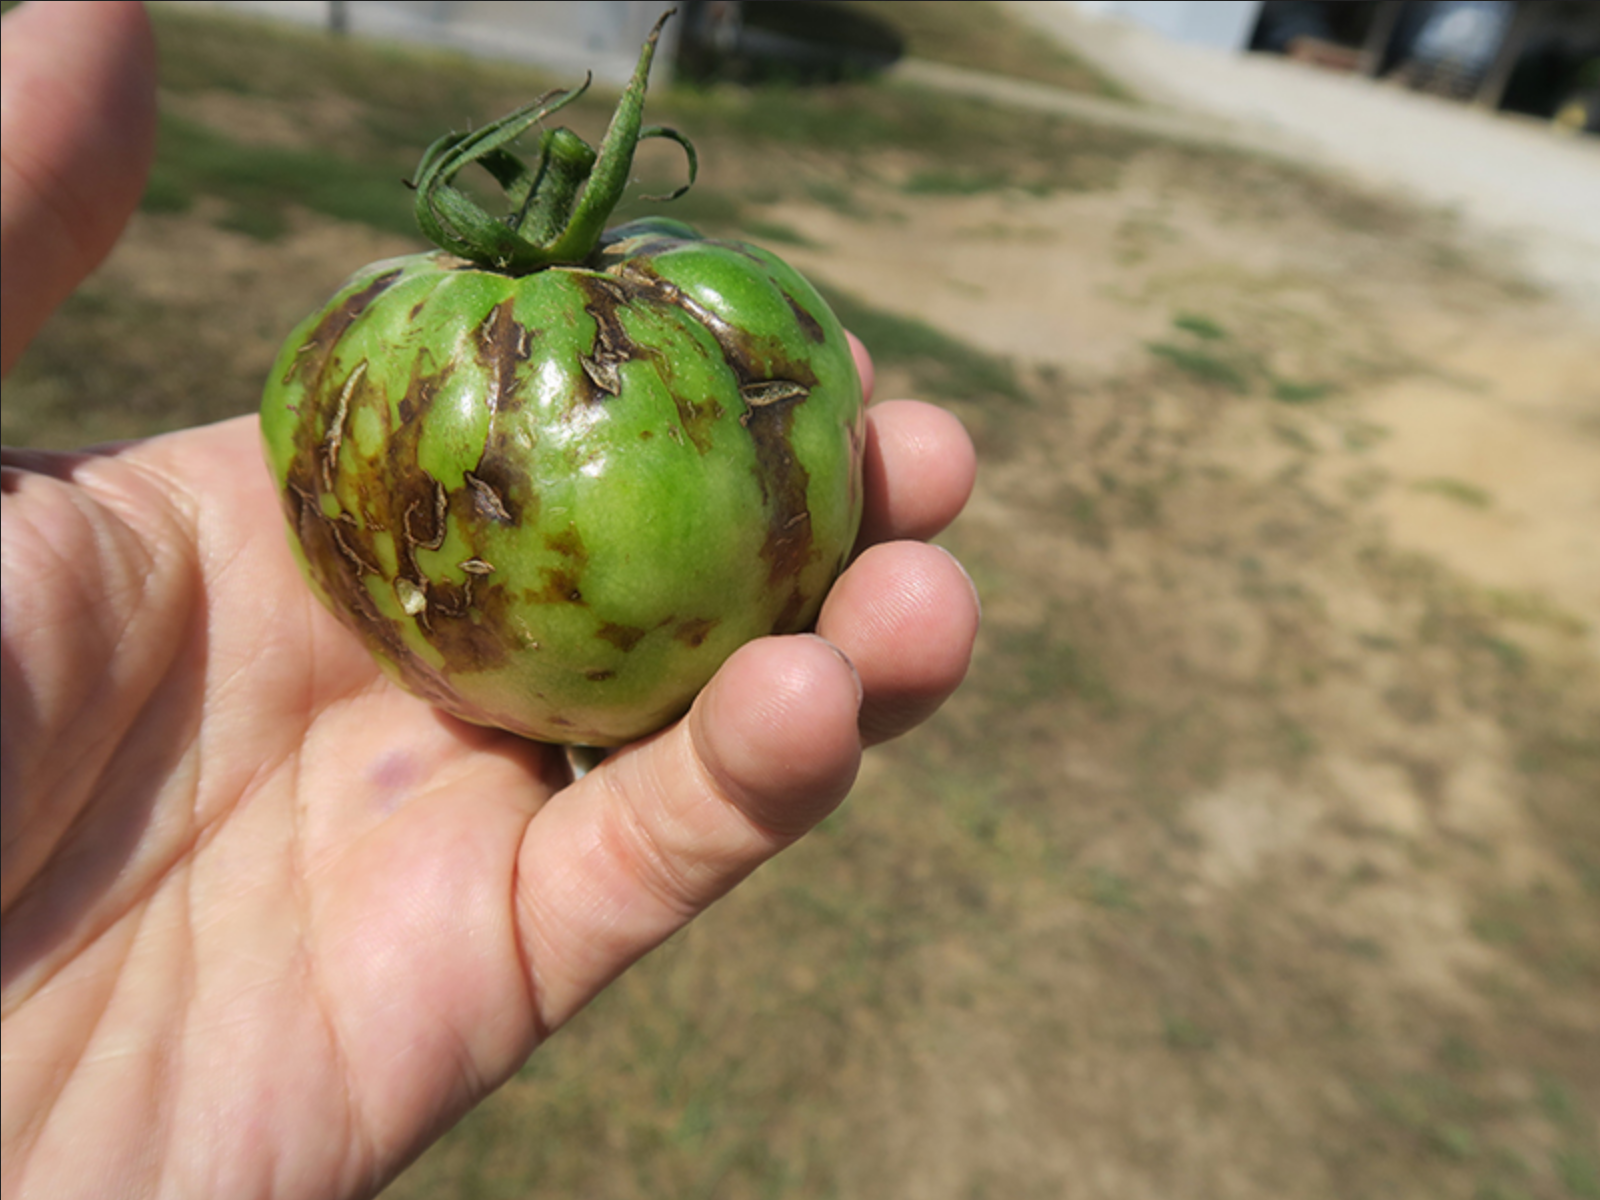  In severe cases, tomato fruit may become distorted by infection with tomato spotted wilt virus.